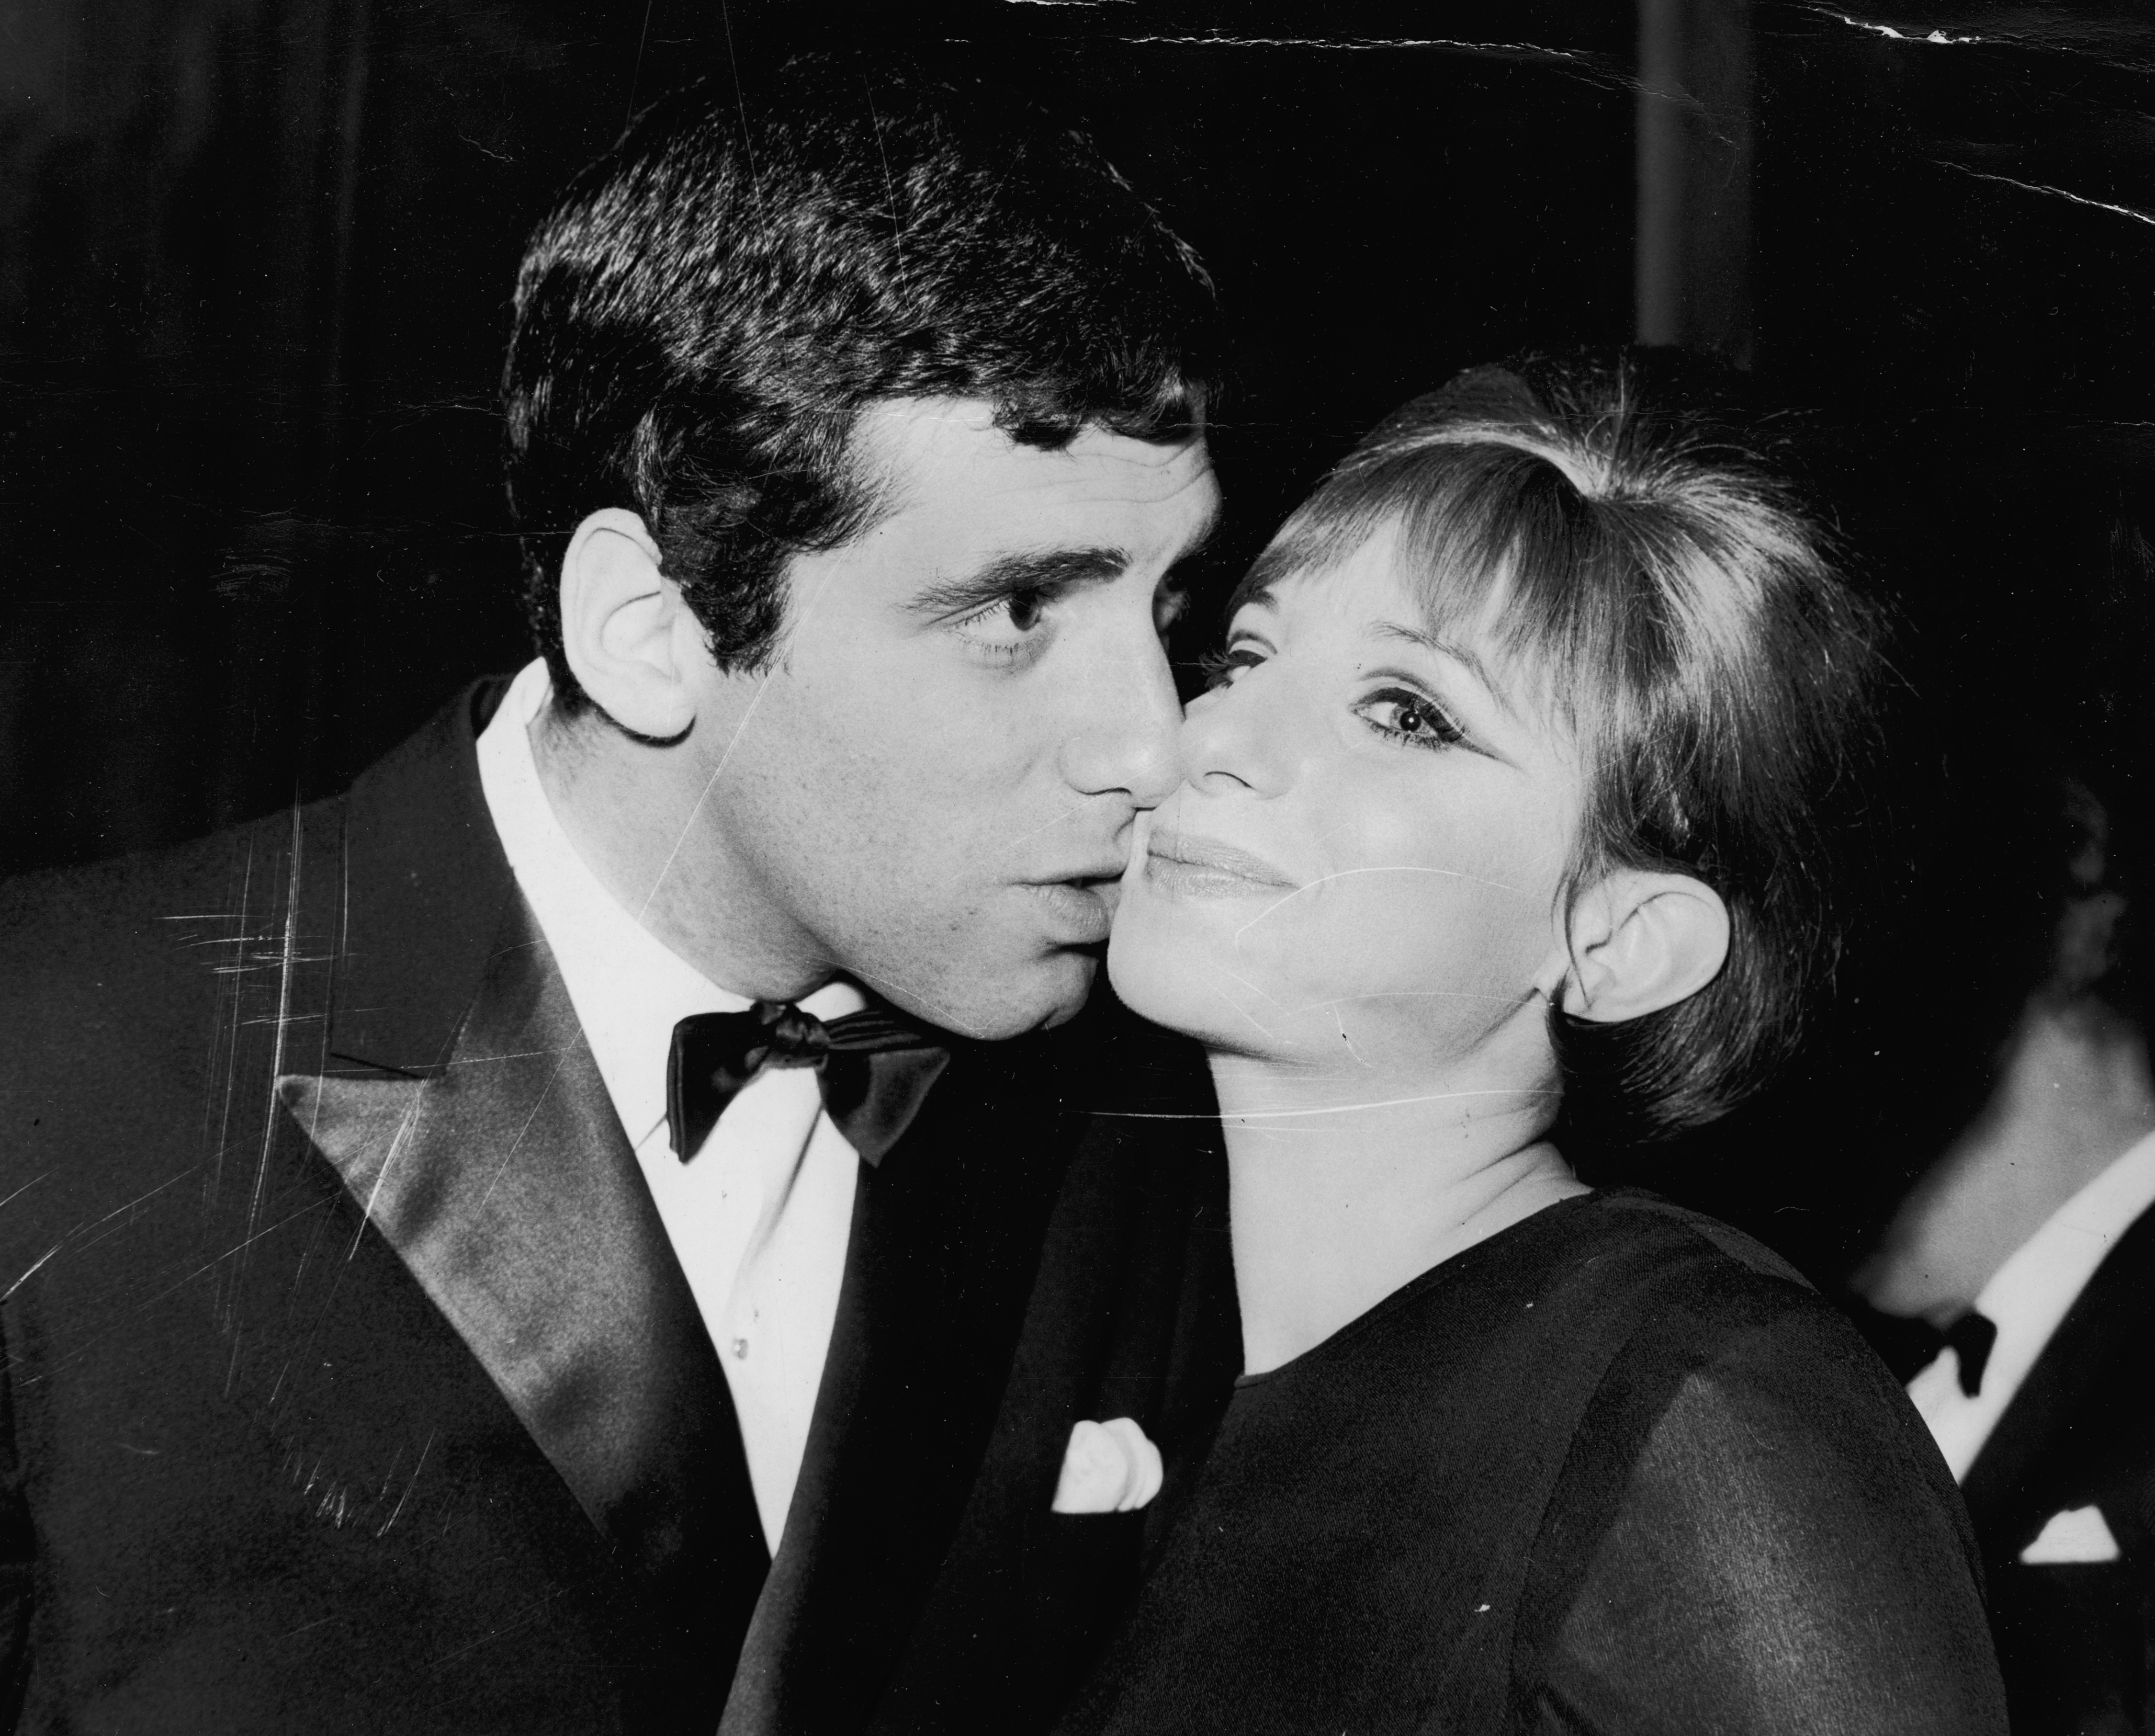 Us actress and singer, Barbra Streisand with her husband, actor Elliott Gould at the Prince of Wales Theatre in London on April 13, 1966 | Source: Getty Images